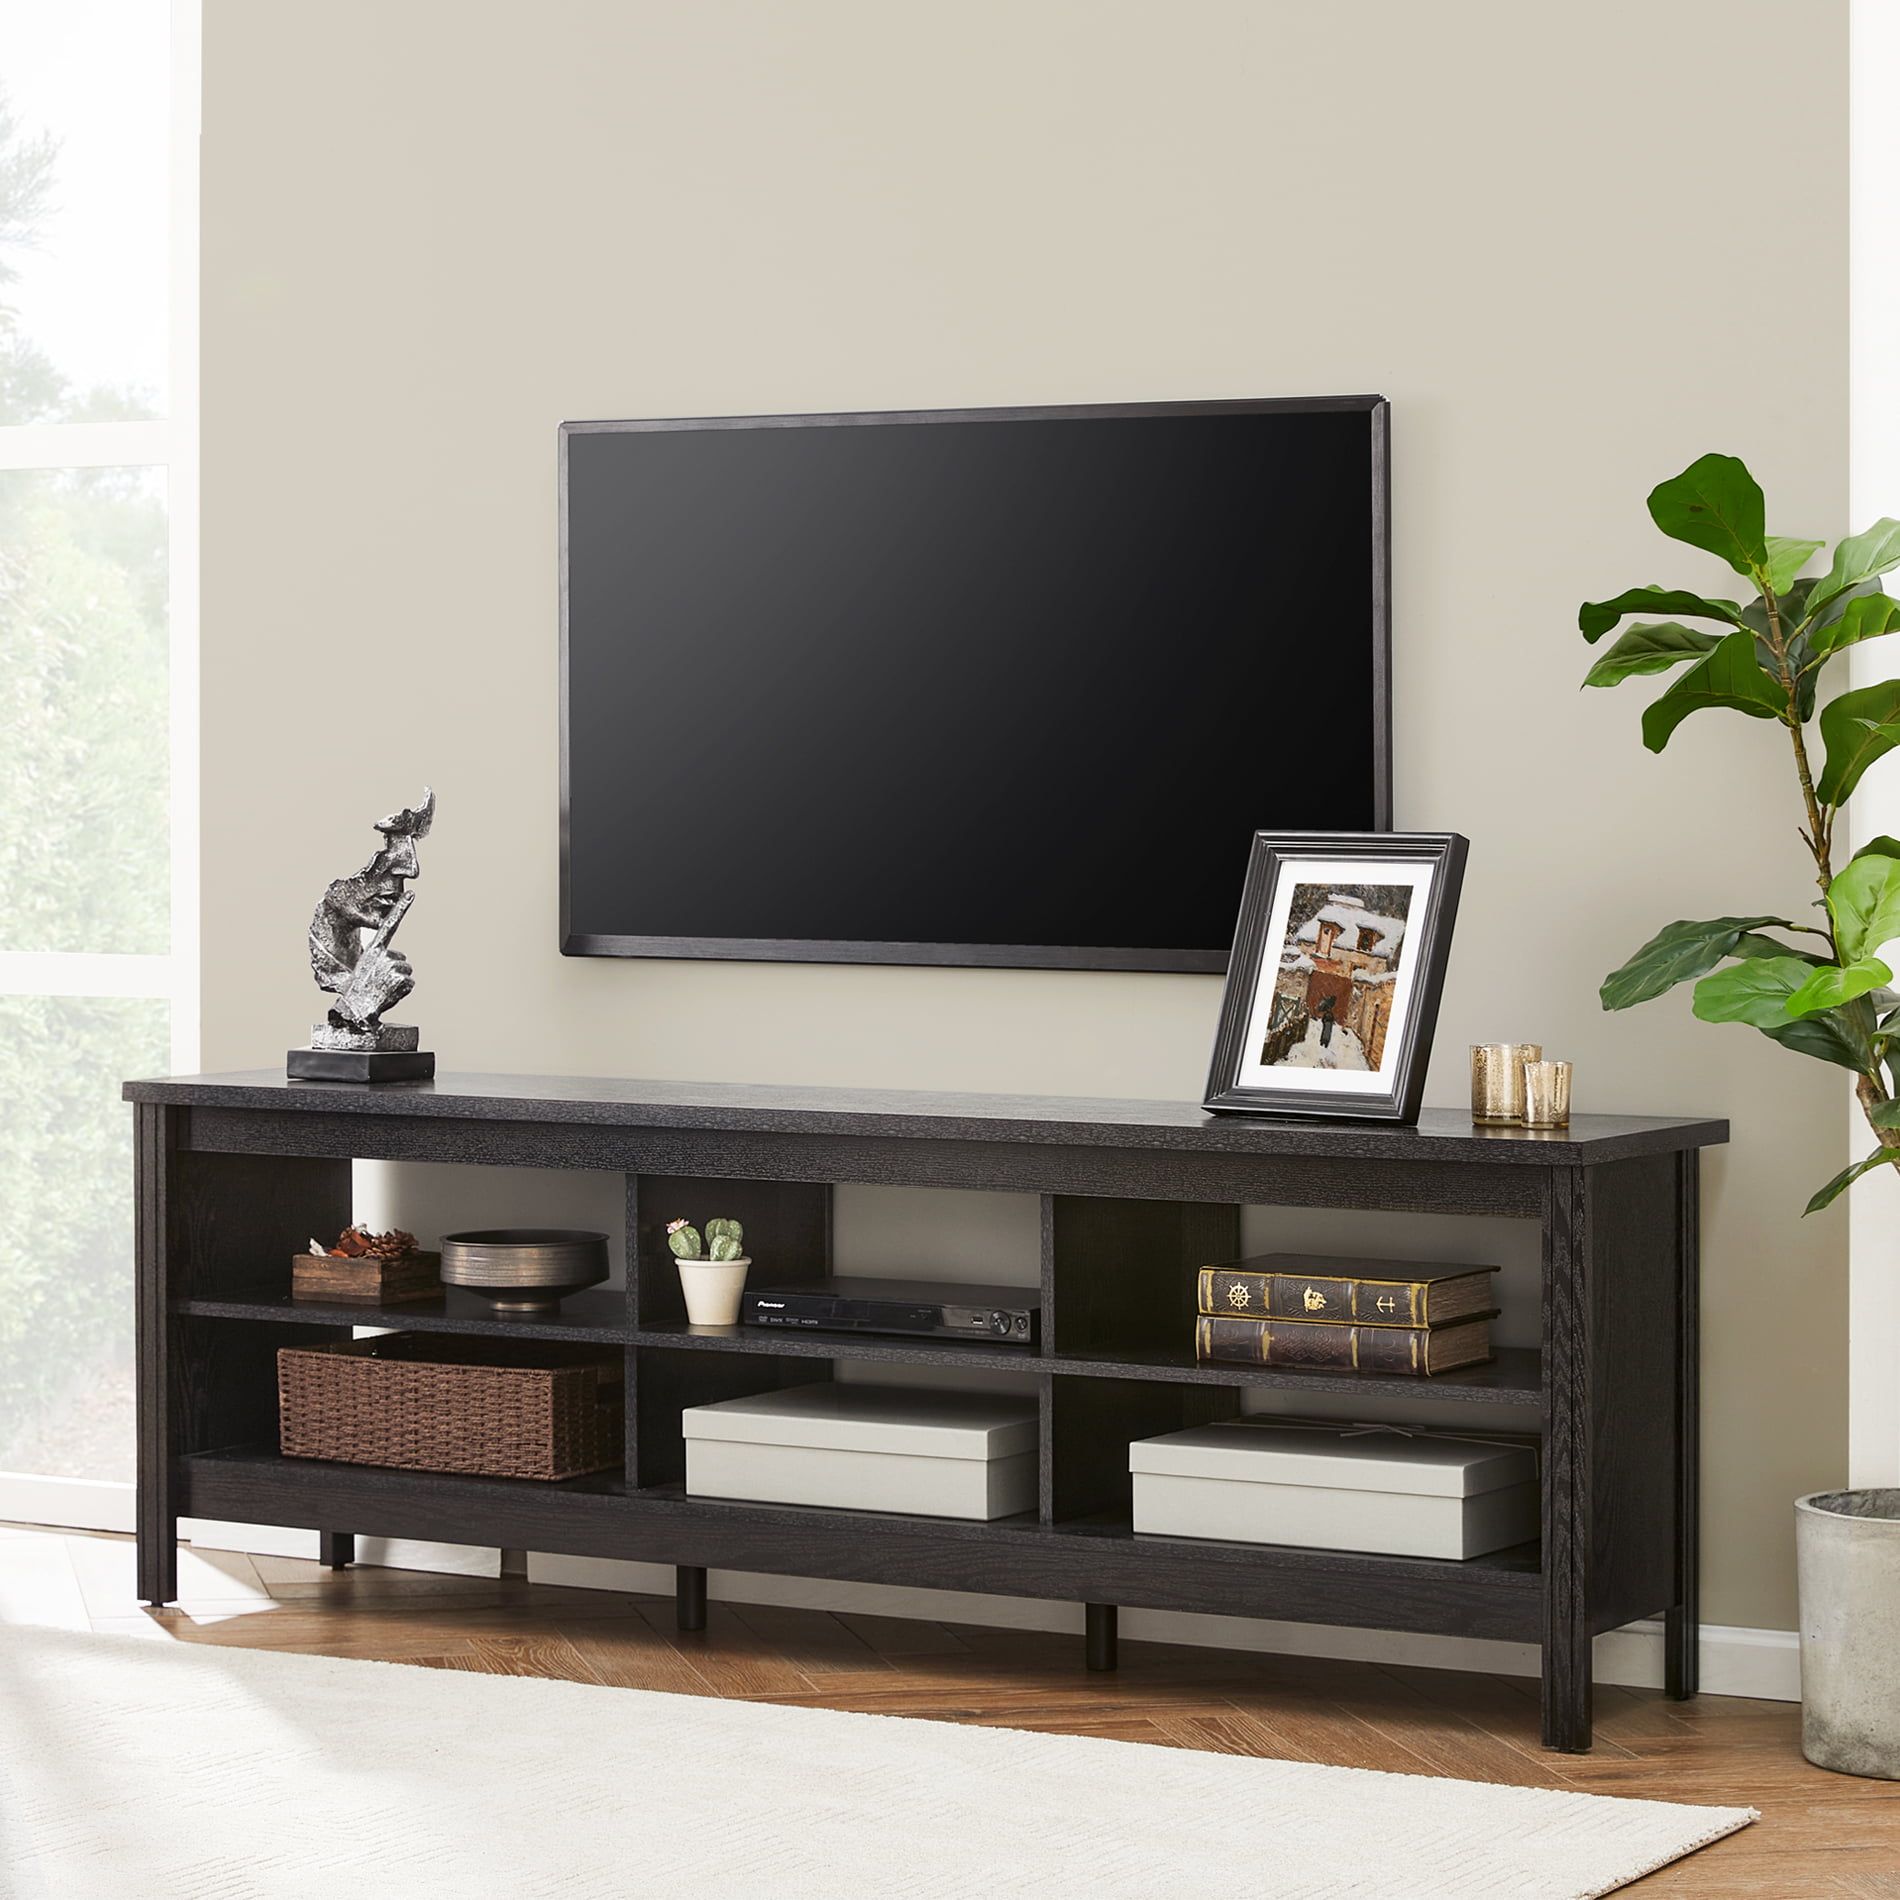 Farmhouse Tv Stands For 75 Inch Flat Screen Media Console Storage Inside Farmhouse Media Entertainment Centers (View 9 of 20)